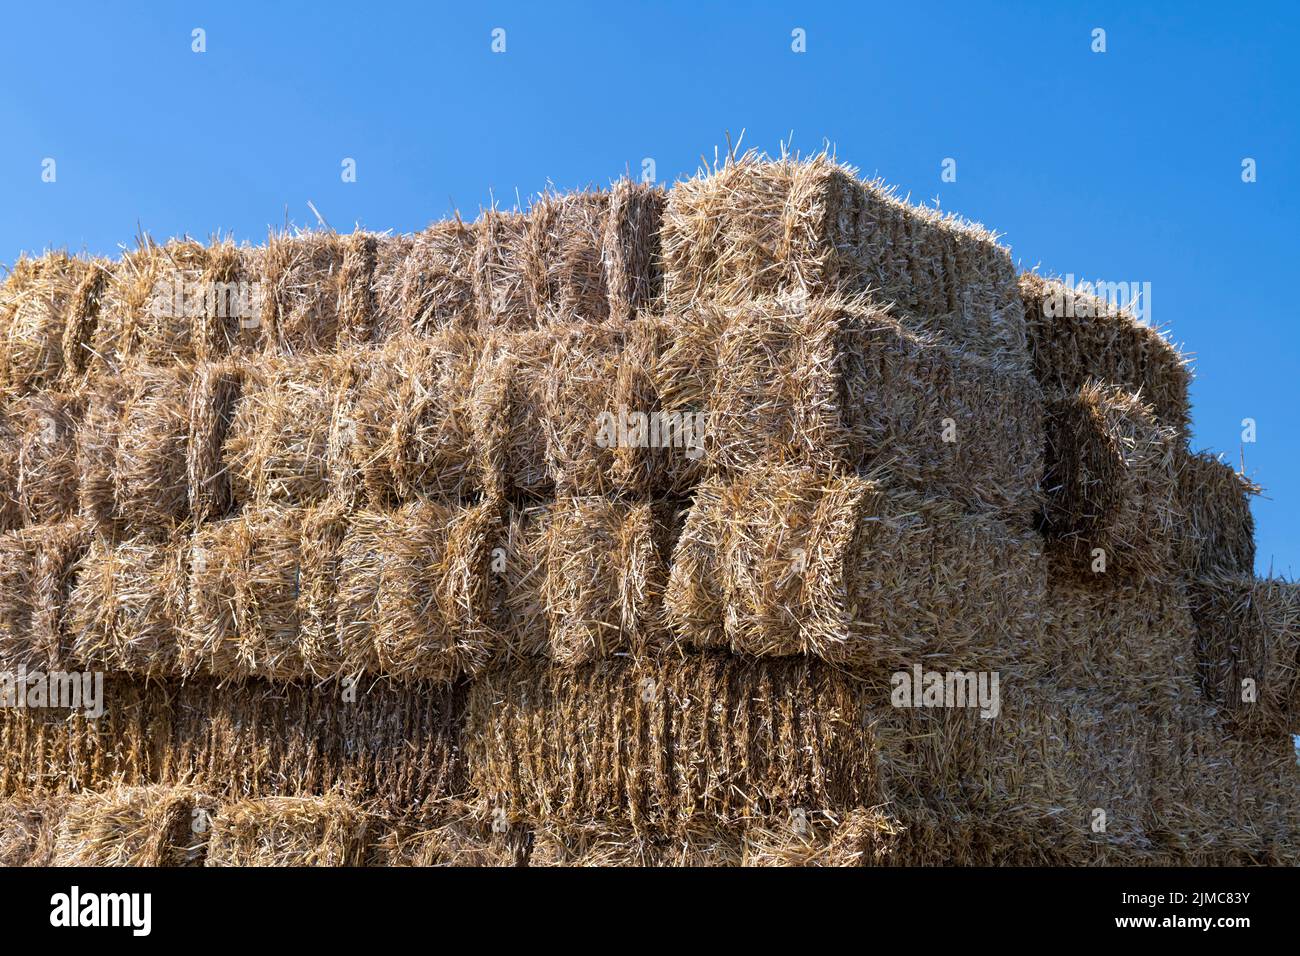 Stack of straw bales against a blue sky Stock Photo